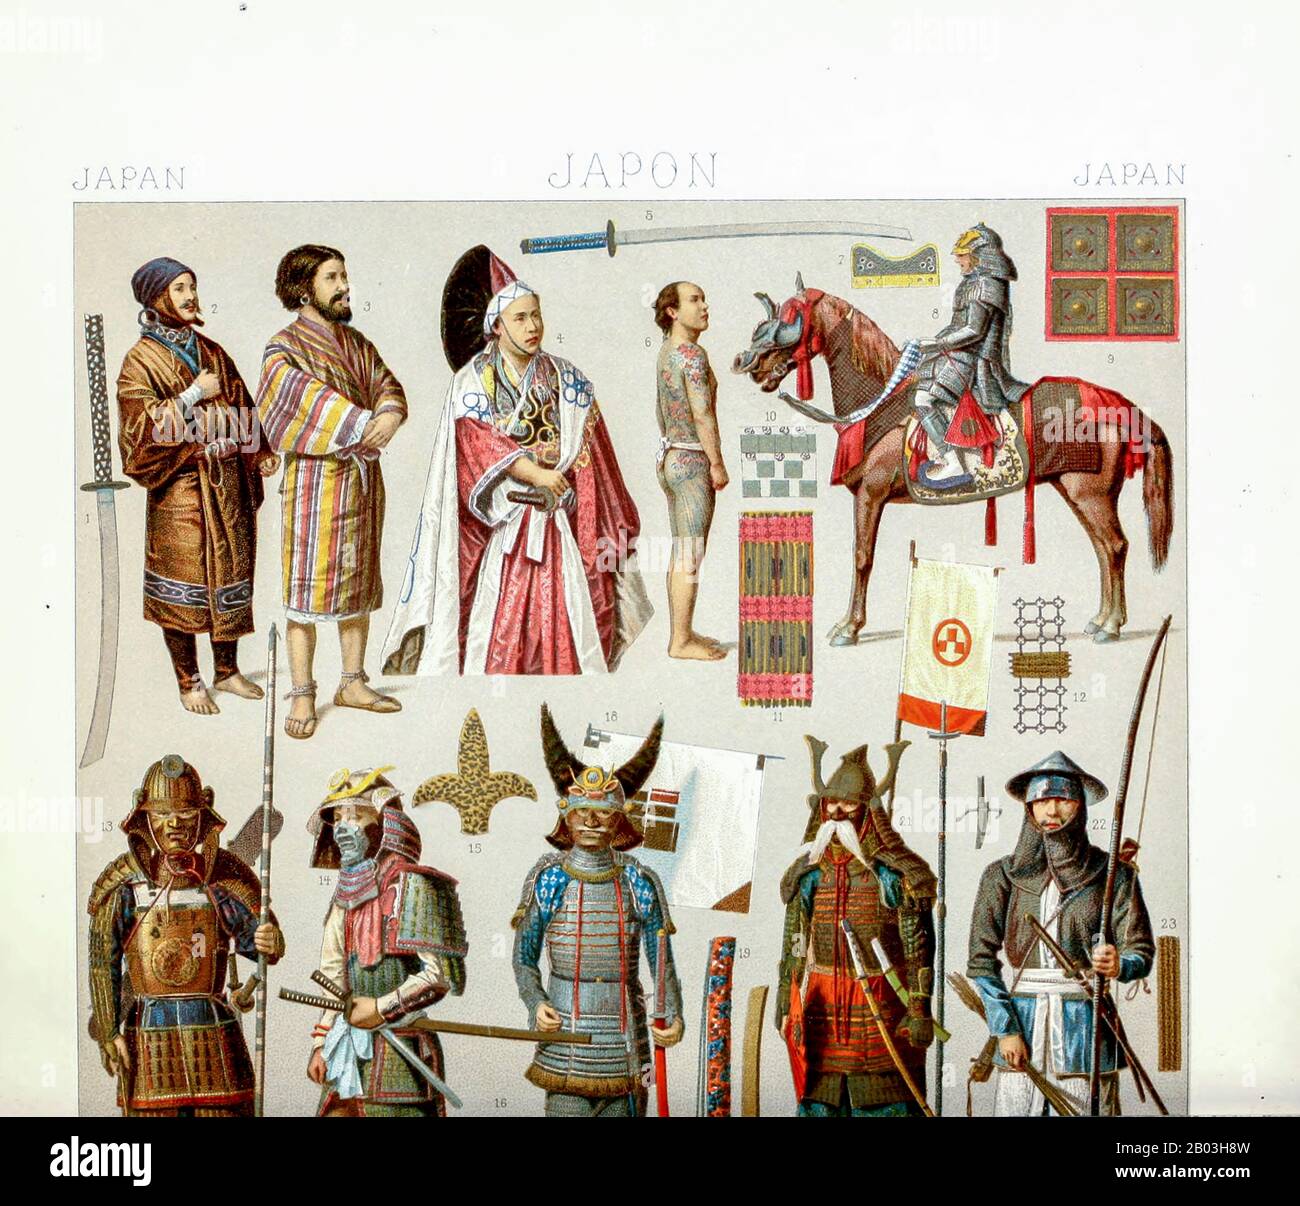 Ancient Japanese fashion, weapons and accessories from Geschichte des kostüms in chronologischer entwicklung (History of the costume in chronological development) by Racinet, A. (Auguste), 1825-1893. and Rosenberg, Adolf, 1850-1906, Volume 1 printed in Berlin in 1888 Stock Photo